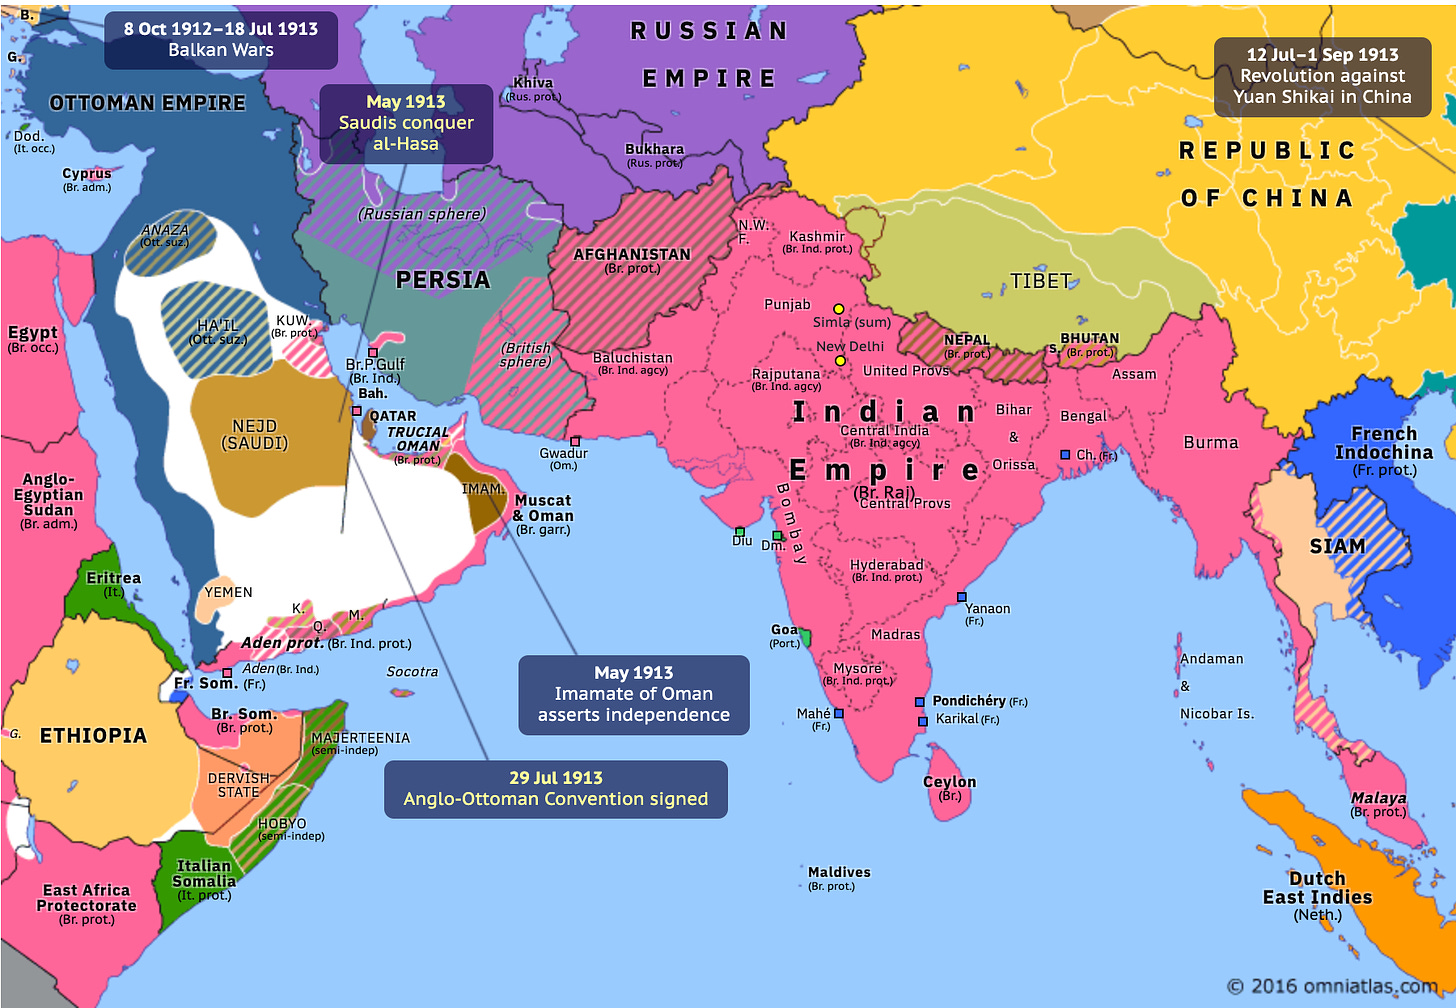 Southern Asia 1913: Anglo-Ottoman Convention.